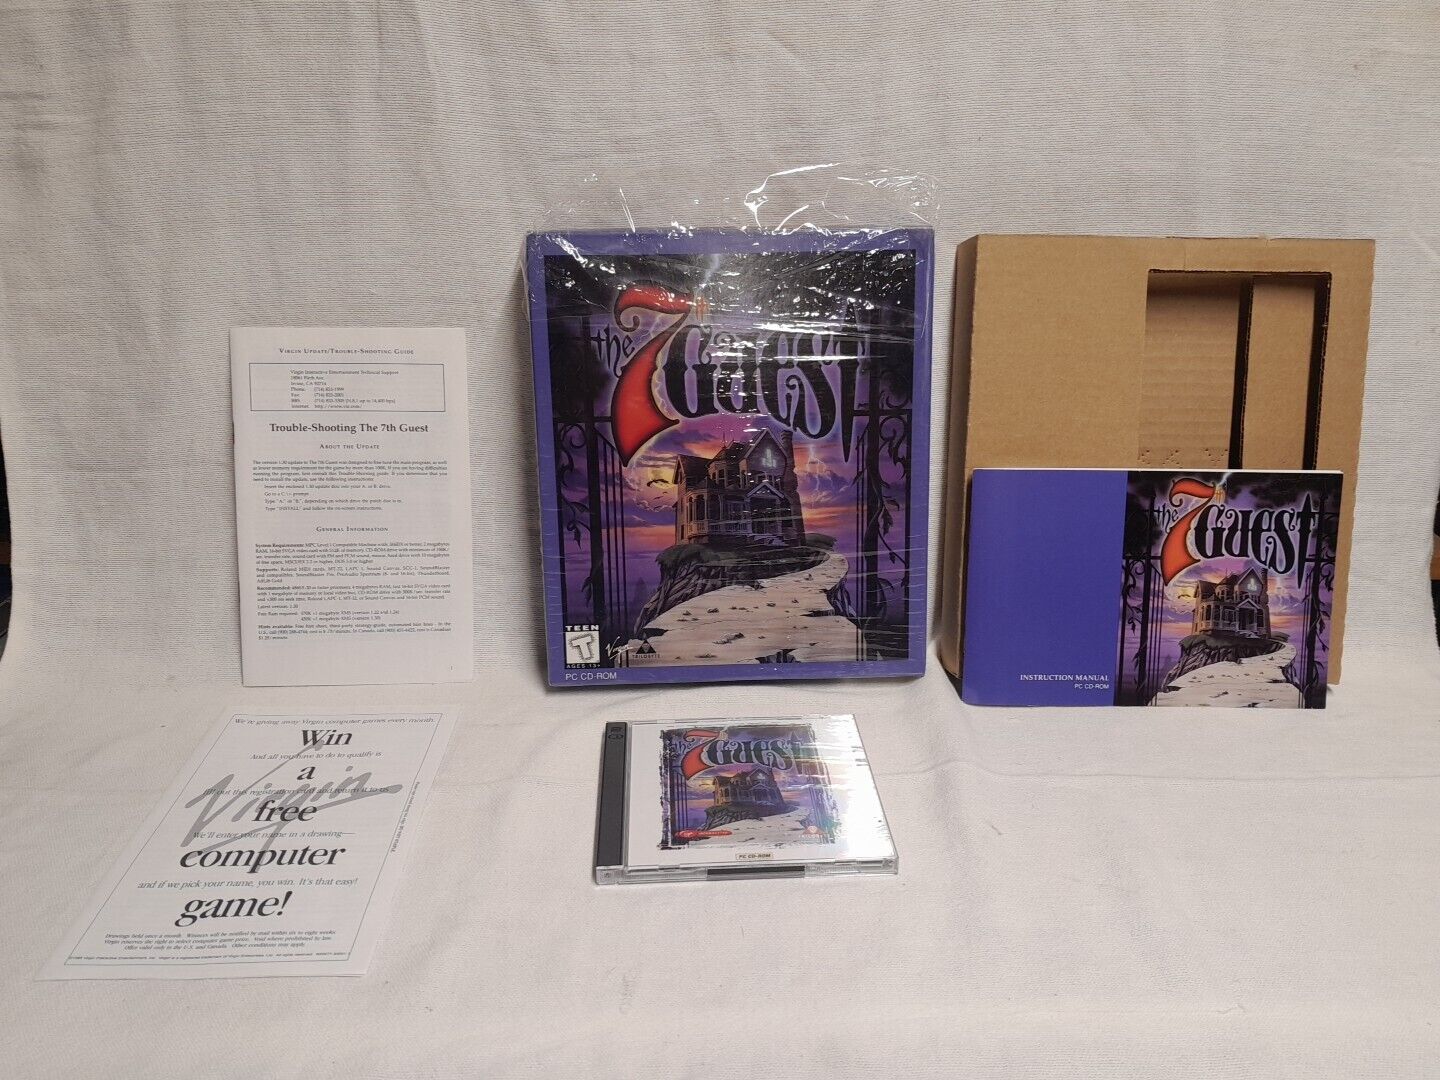 The 7th Guest PC CD-ROM in Big Box - Vintage Software - Gaming 1992 Virgin